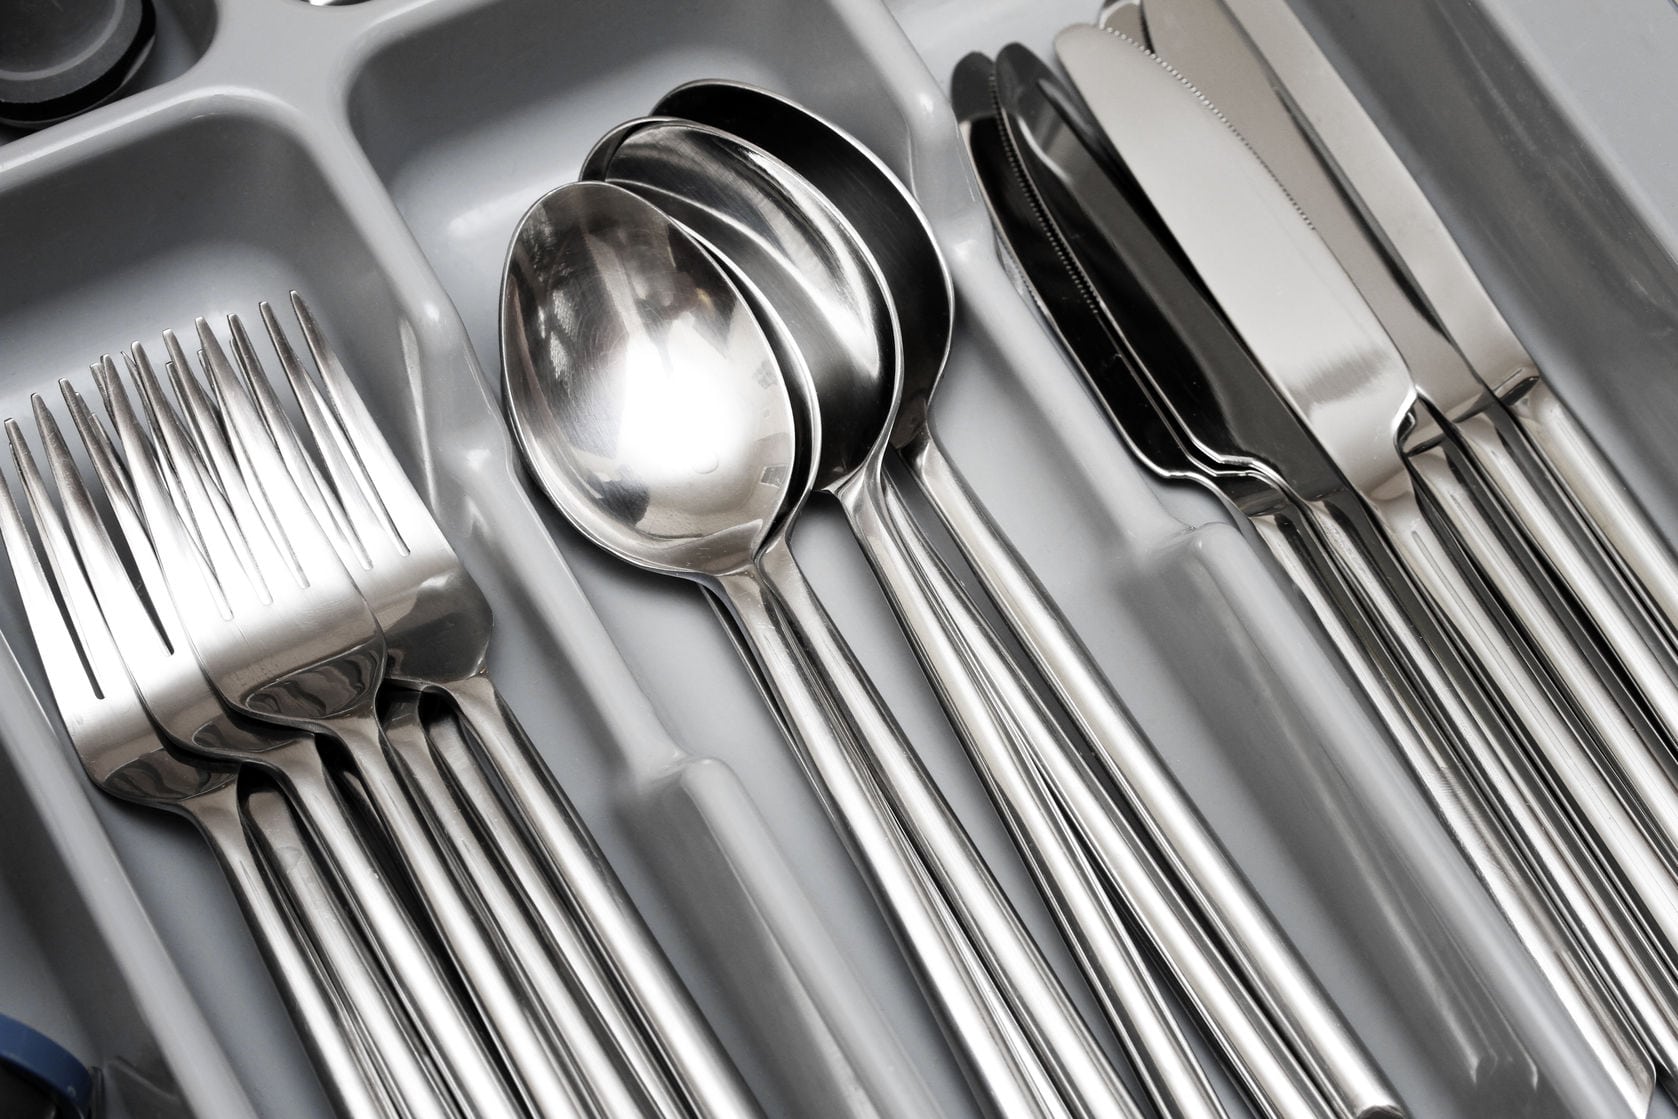 Tips For Packing Silverware